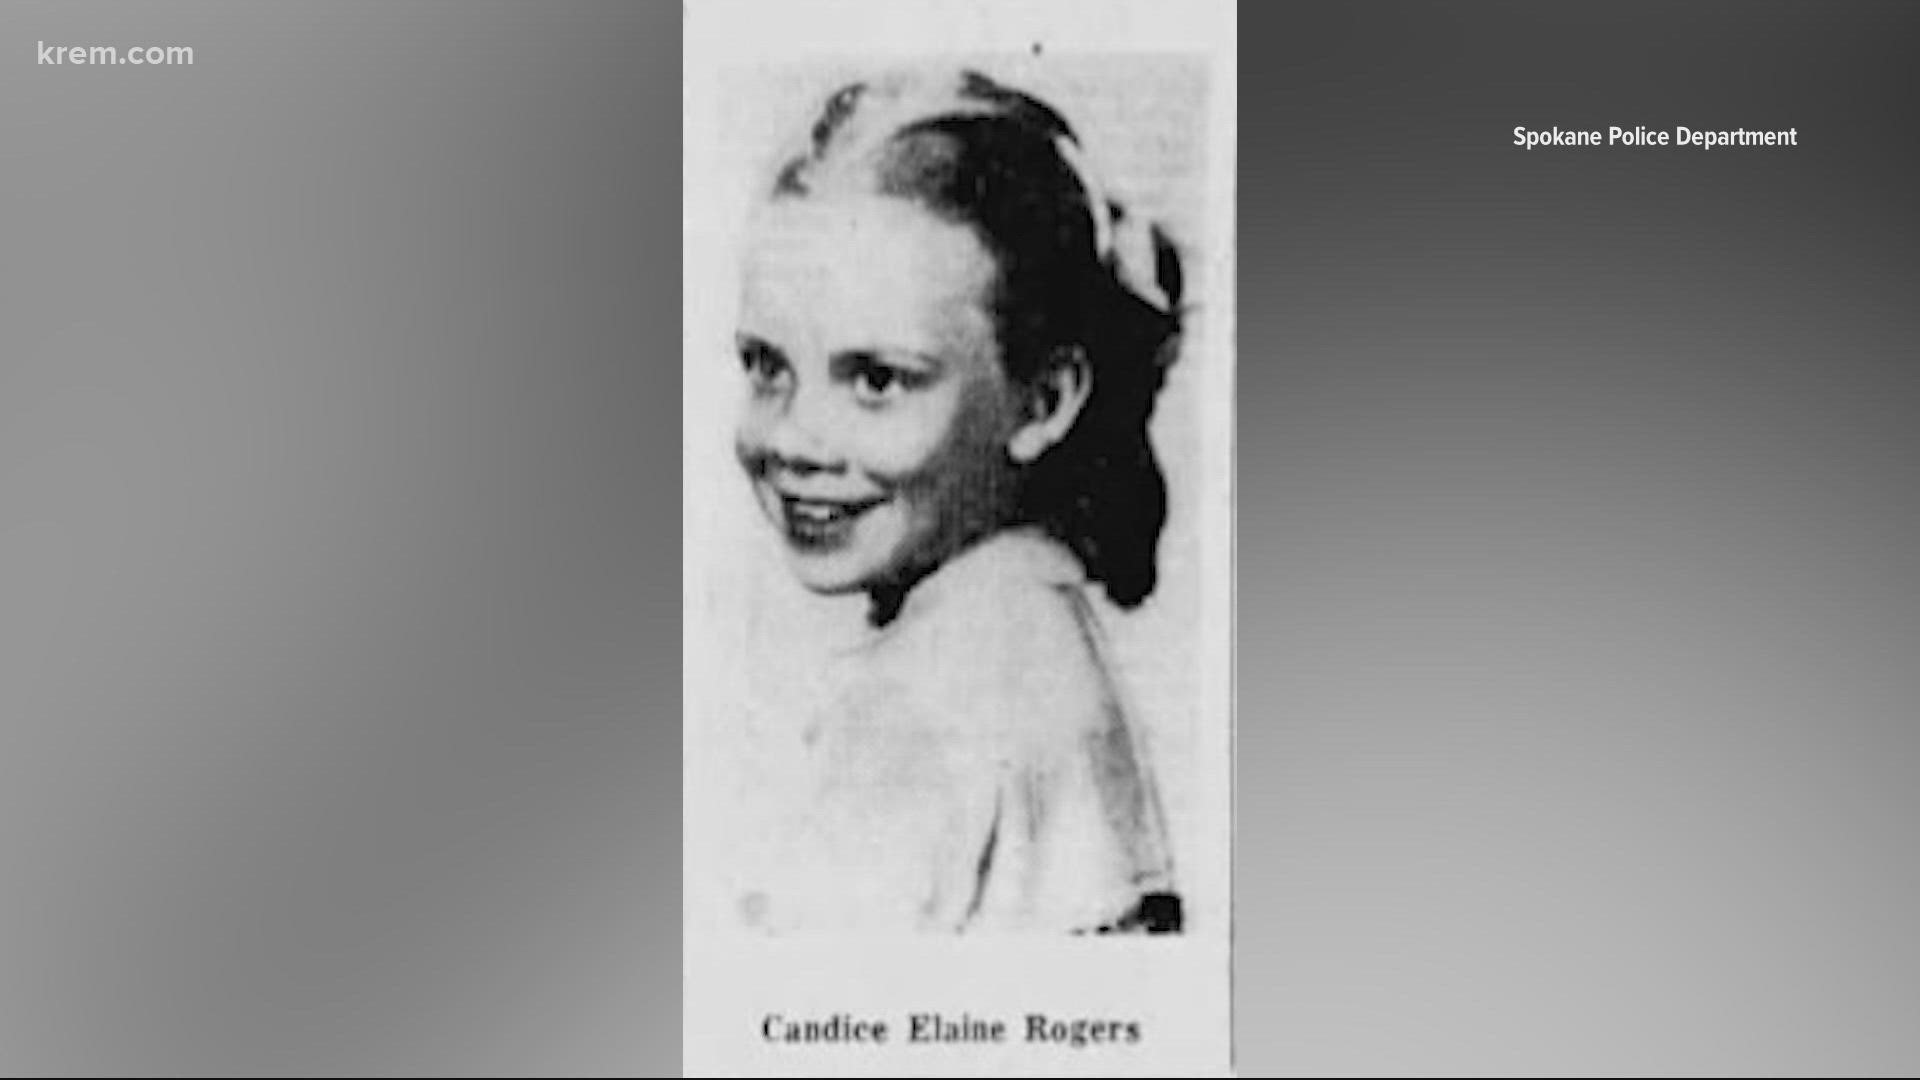 Candy Rogers went missing on March 6, 1959 while selling campfire mints. Spokane police revealed the man responsible for her death in a press conference on Friday.